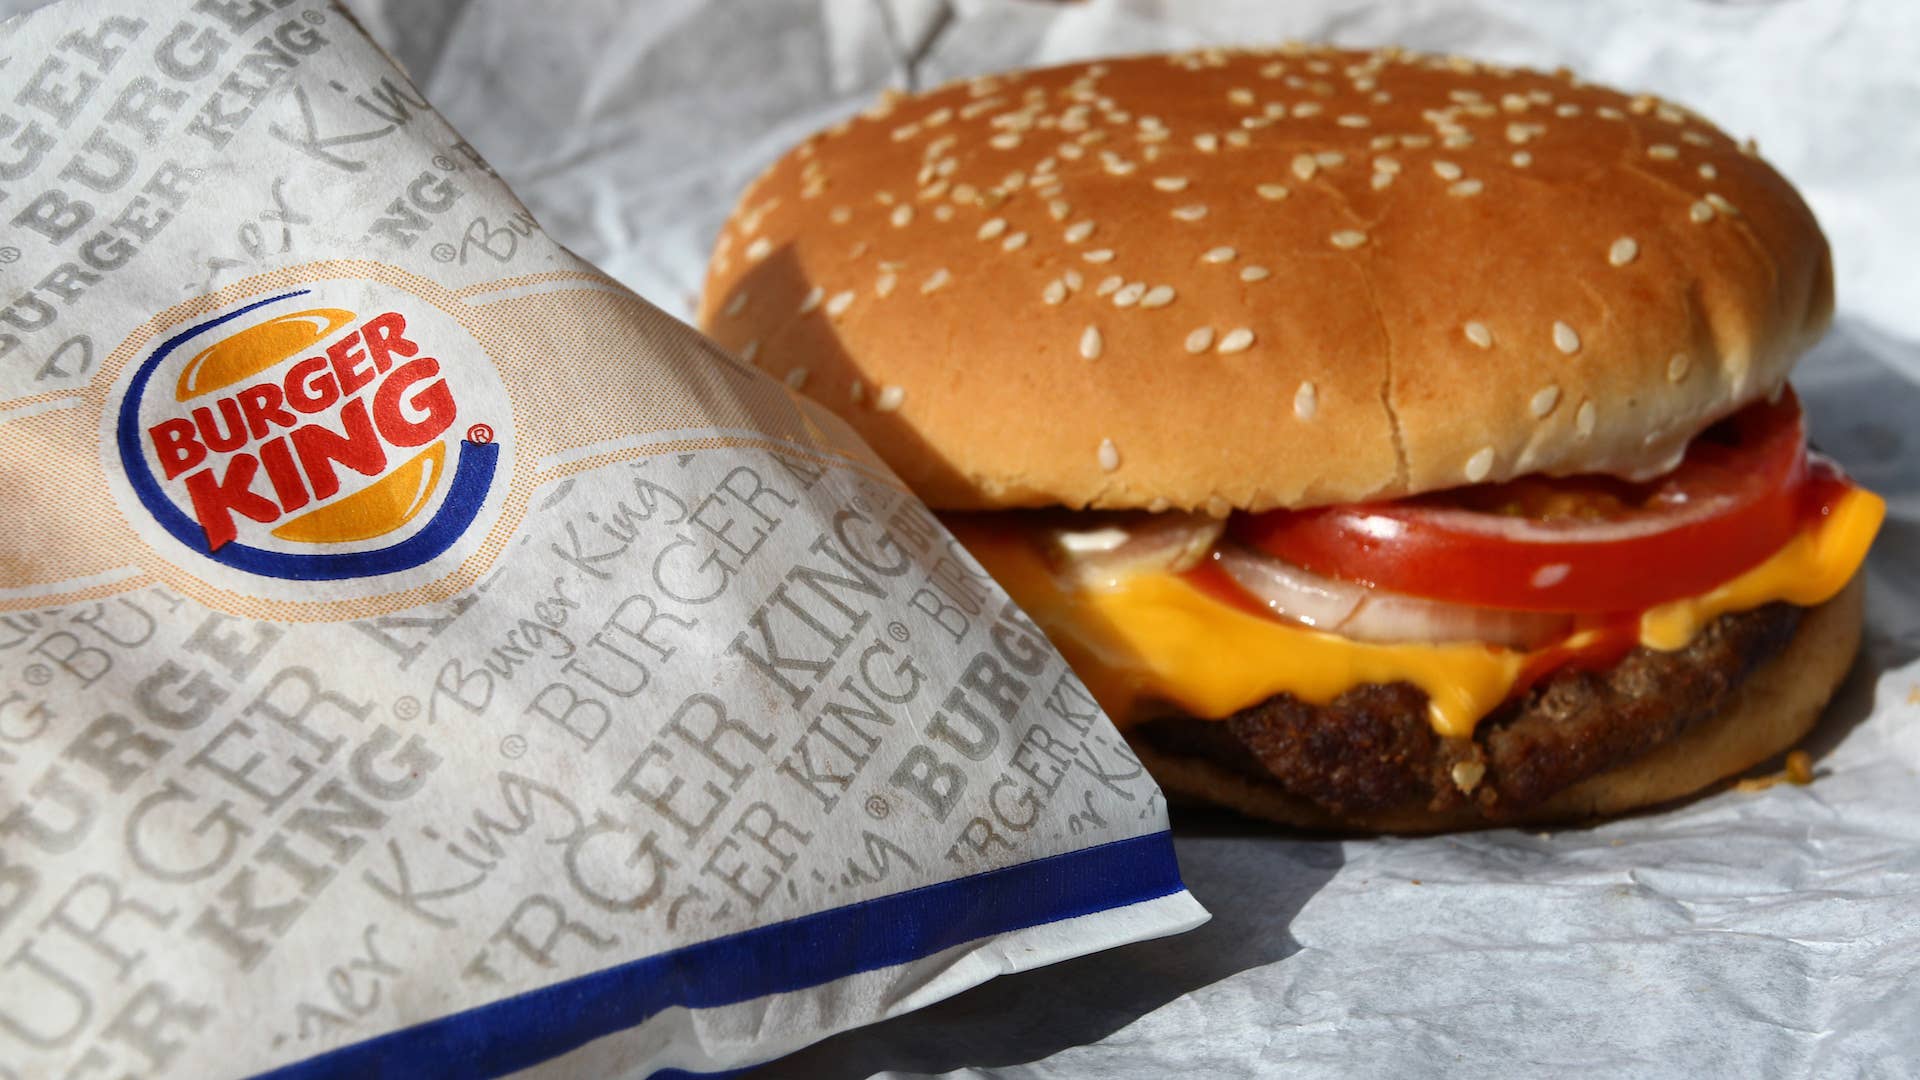 Whopper from the fast food chain Burger King sits on a packaging paper in Kaufbeuren, Germany.